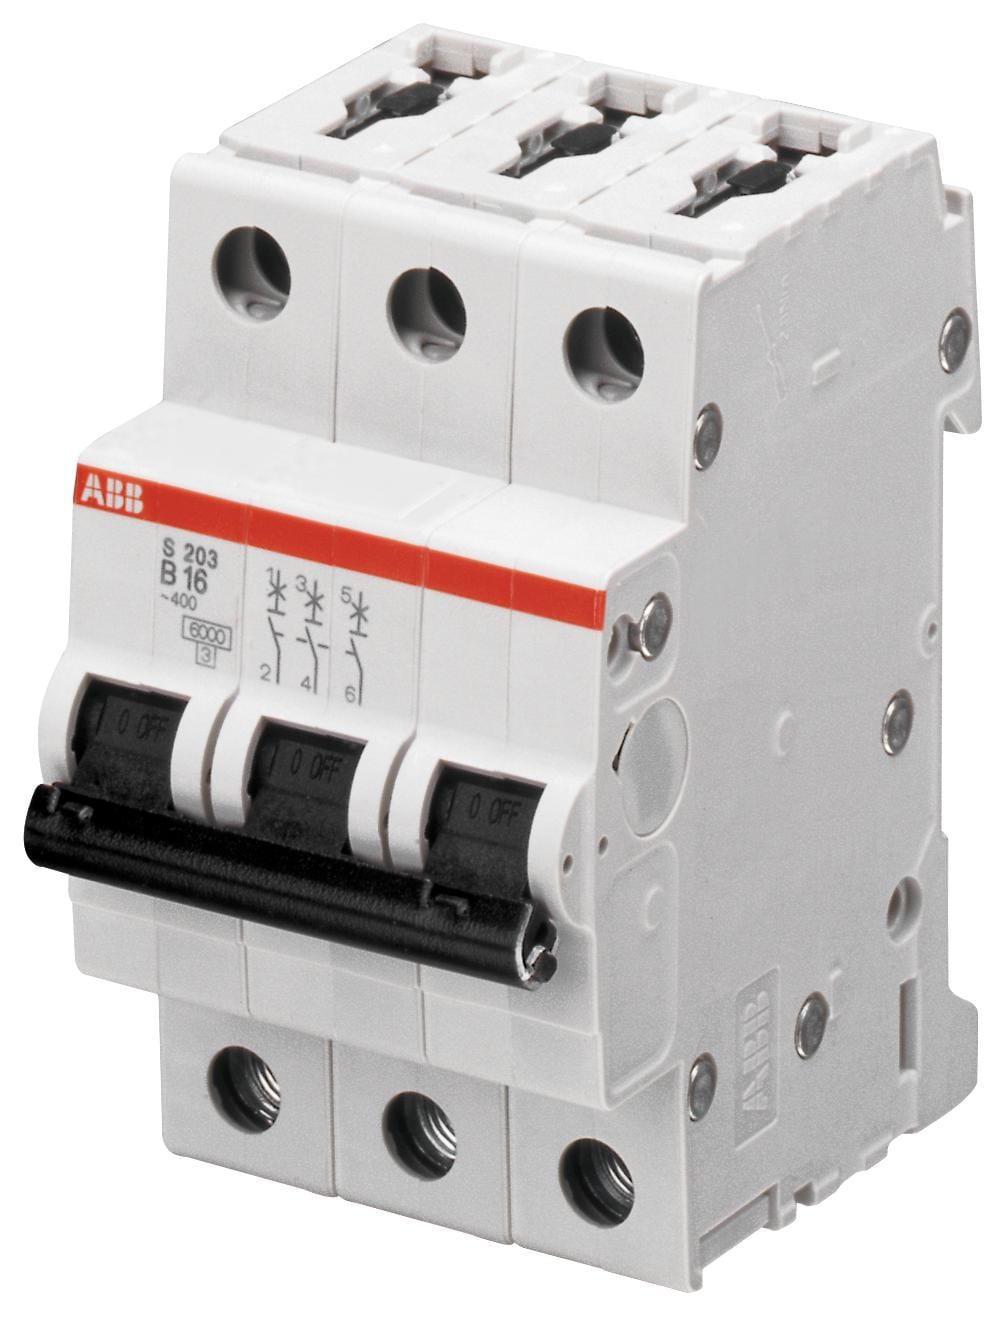 ABB Thermal Magnetic S203M-D25 CIRCUIT BREAKER, THERMAL MAG, 3 POLE ABB 2501407 S203M-D25